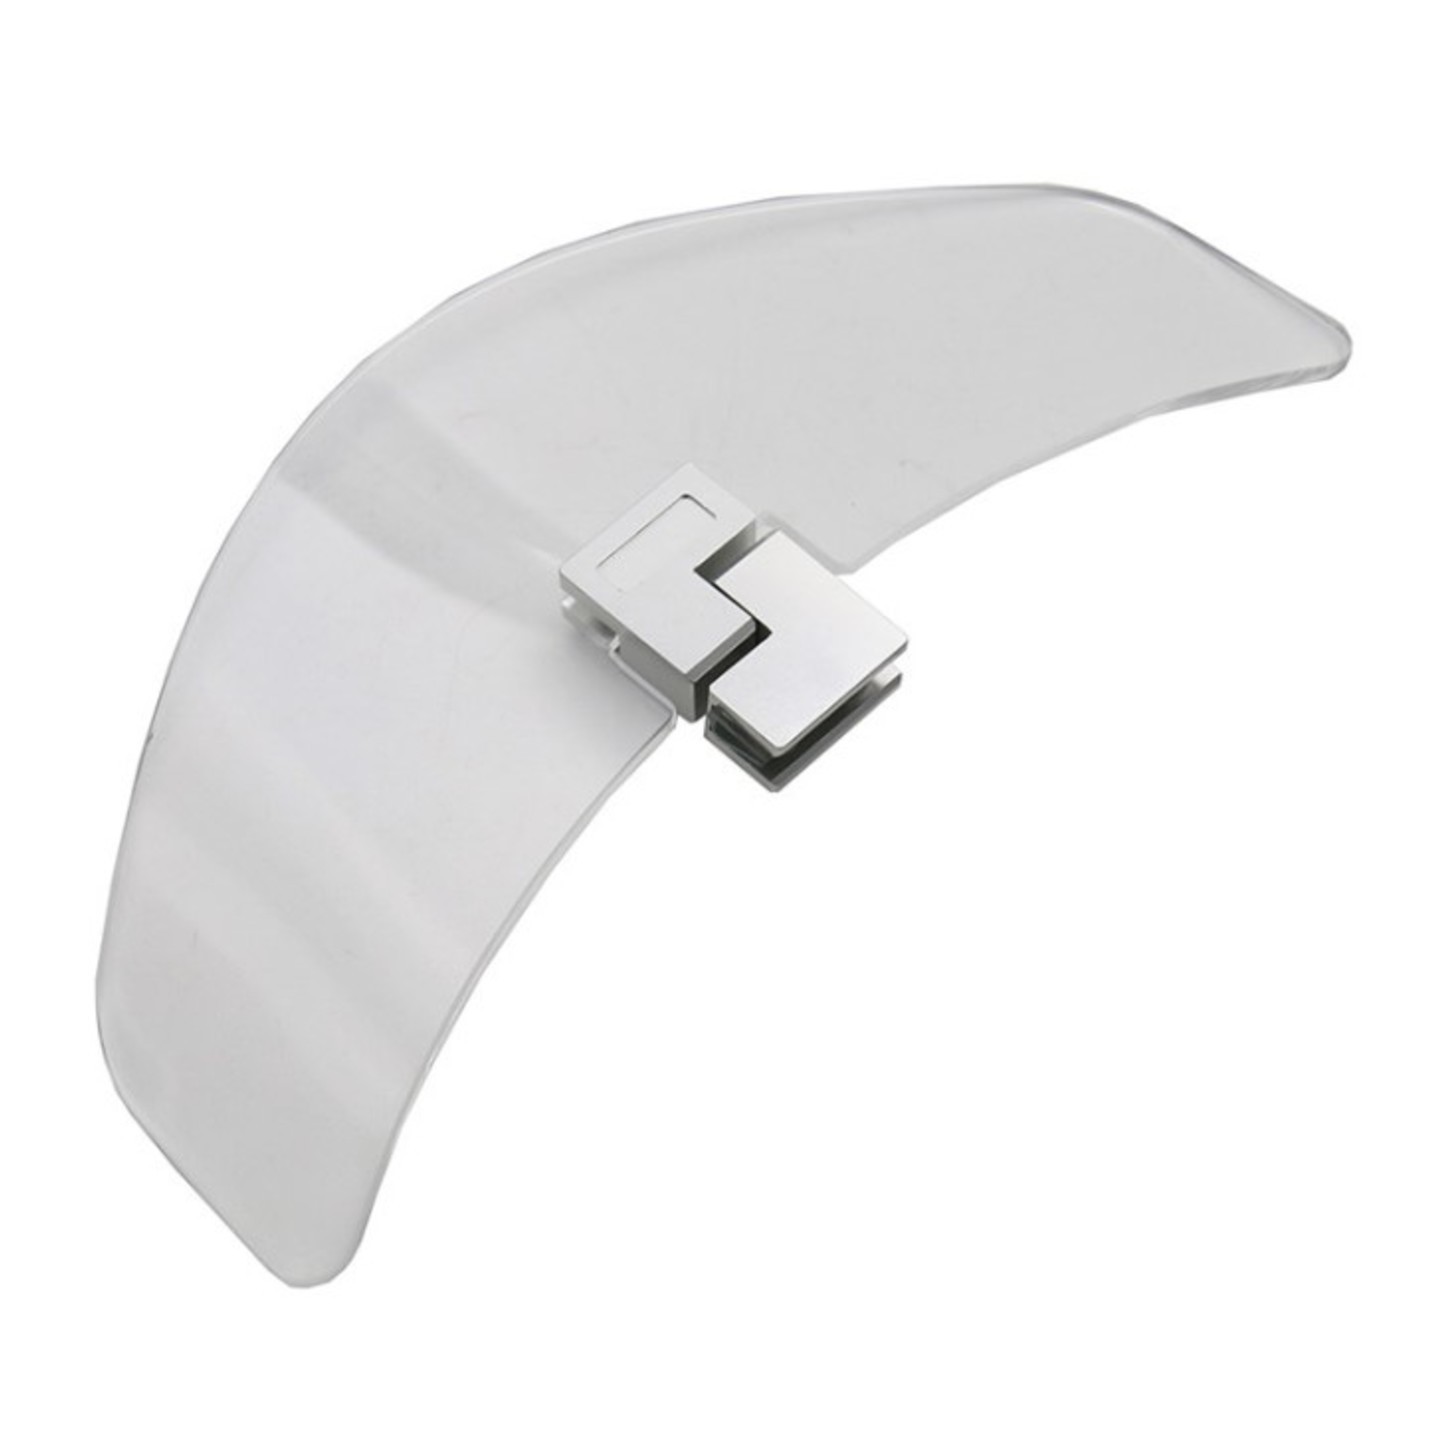 Universal curved windscreen modifications clamp